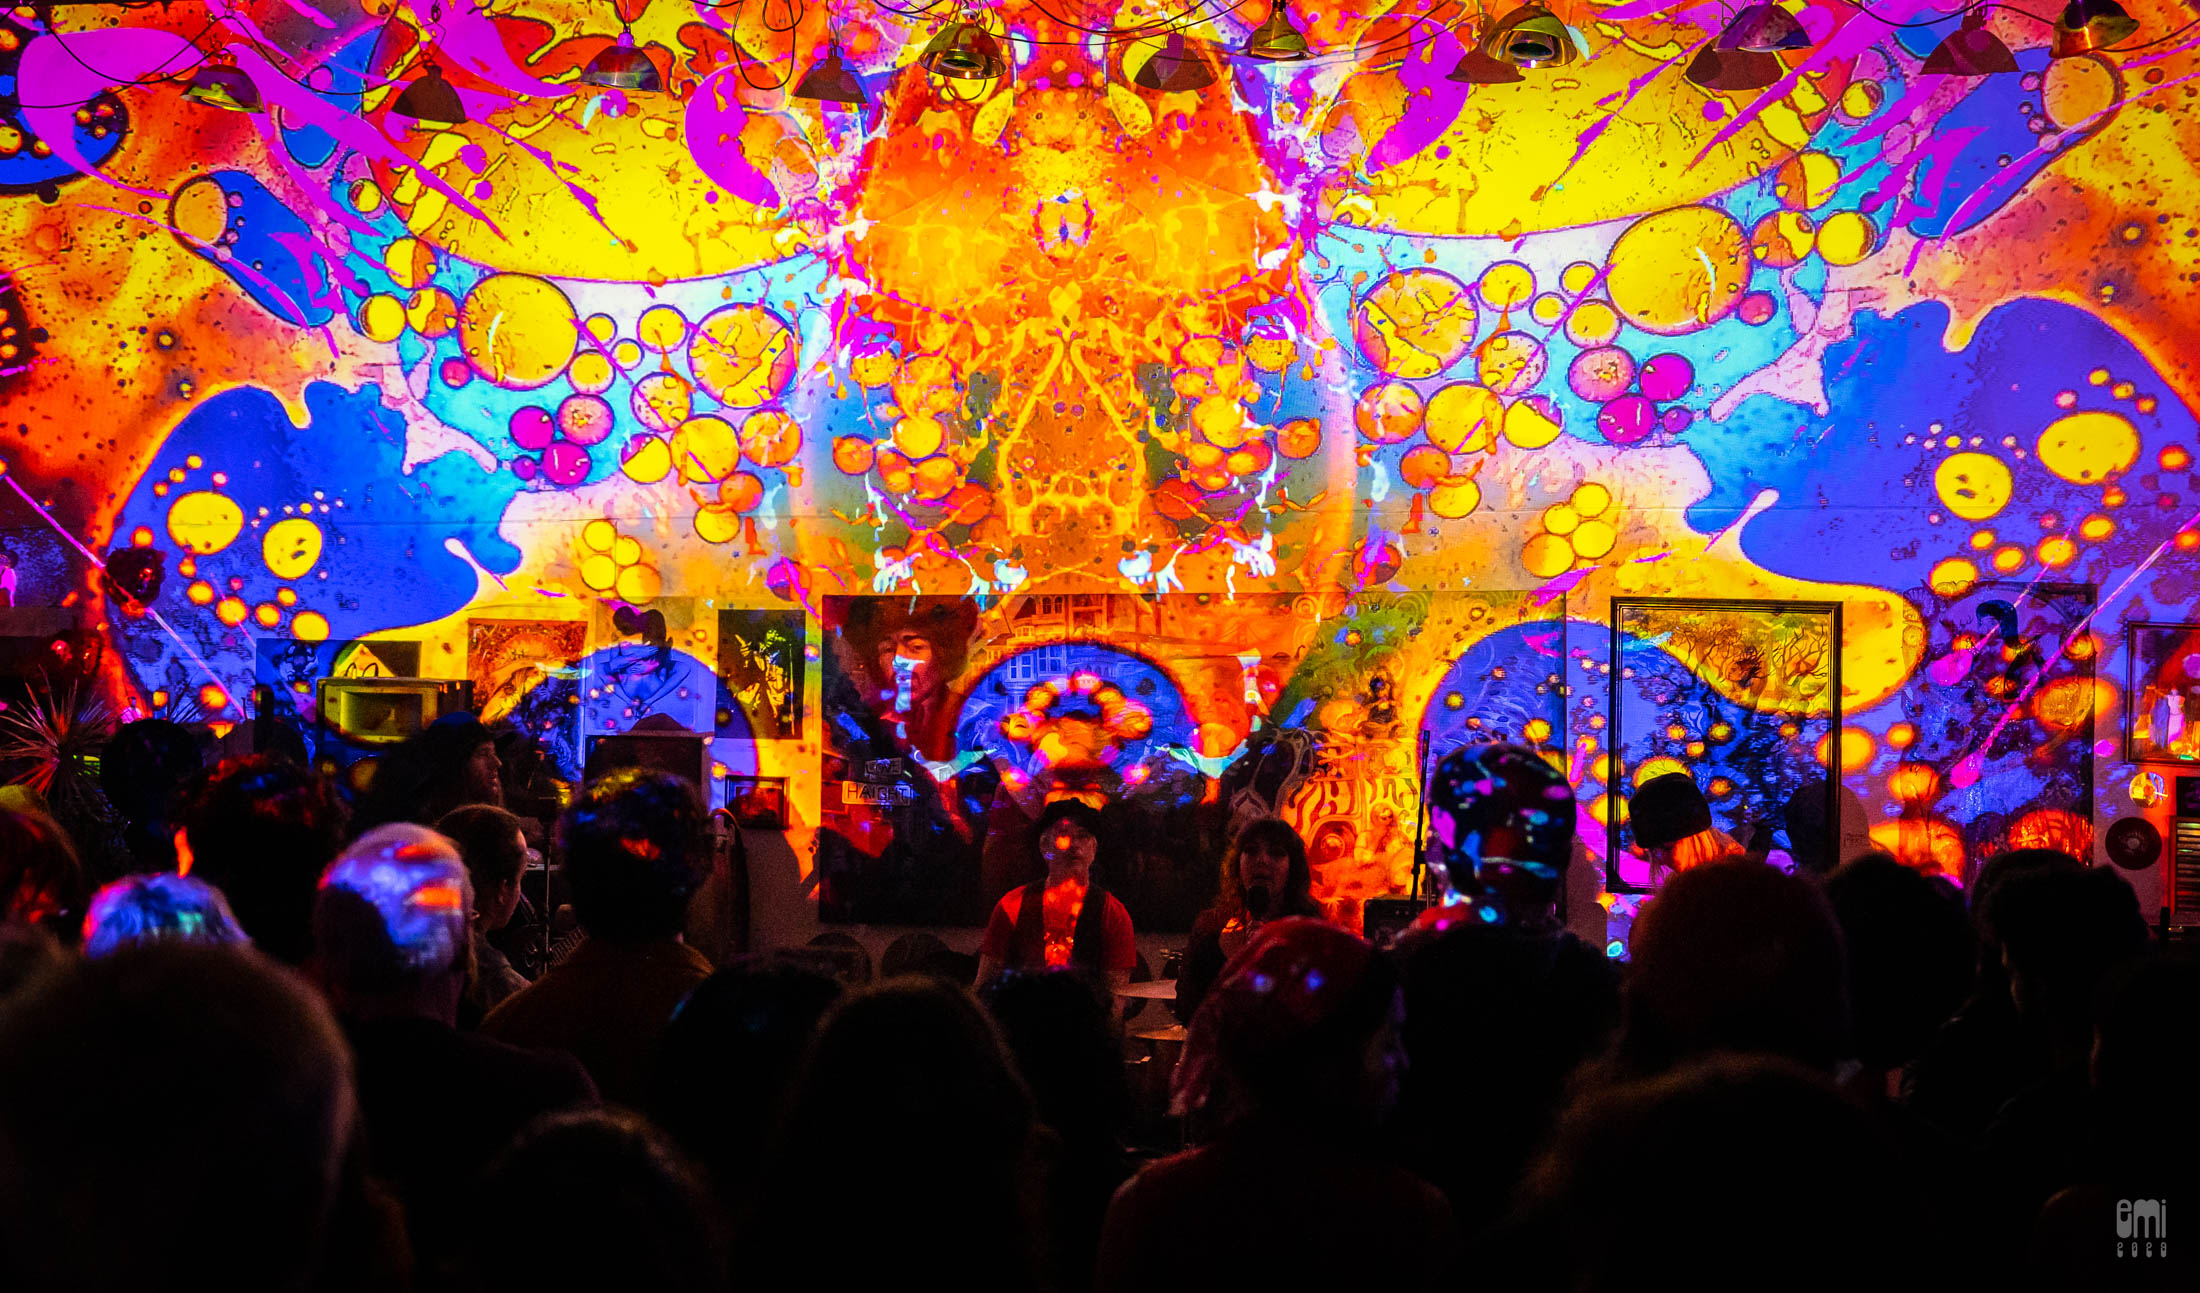 2023.1.14 Tabernacle with Mad Alchemy Liquid Light Show at Art House Gallery, Berkeley. photo by emi